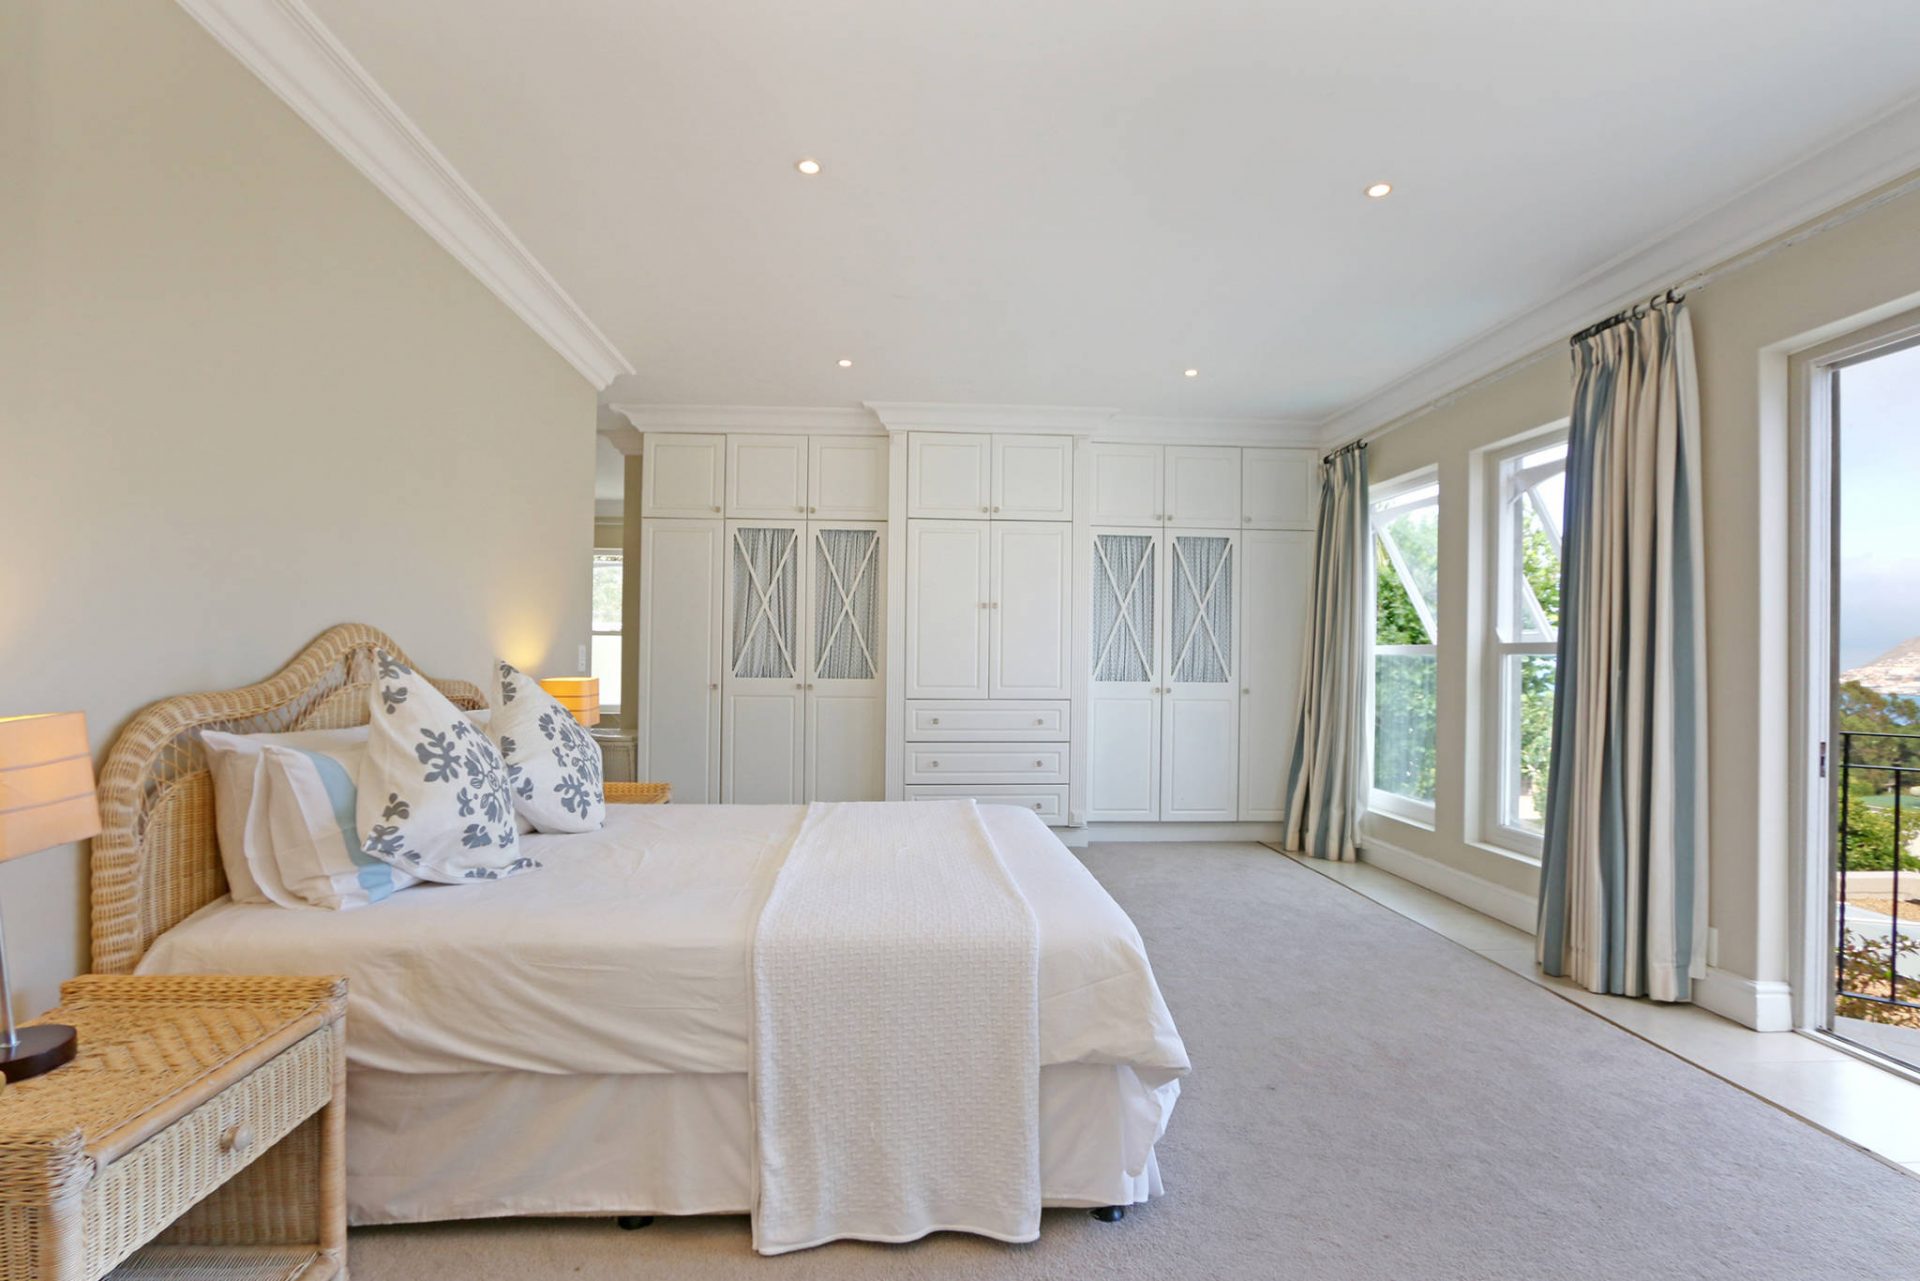 Photo 6 of King Street Villa accommodation in Hout Bay, Cape Town with 3 bedrooms and 2 bathrooms